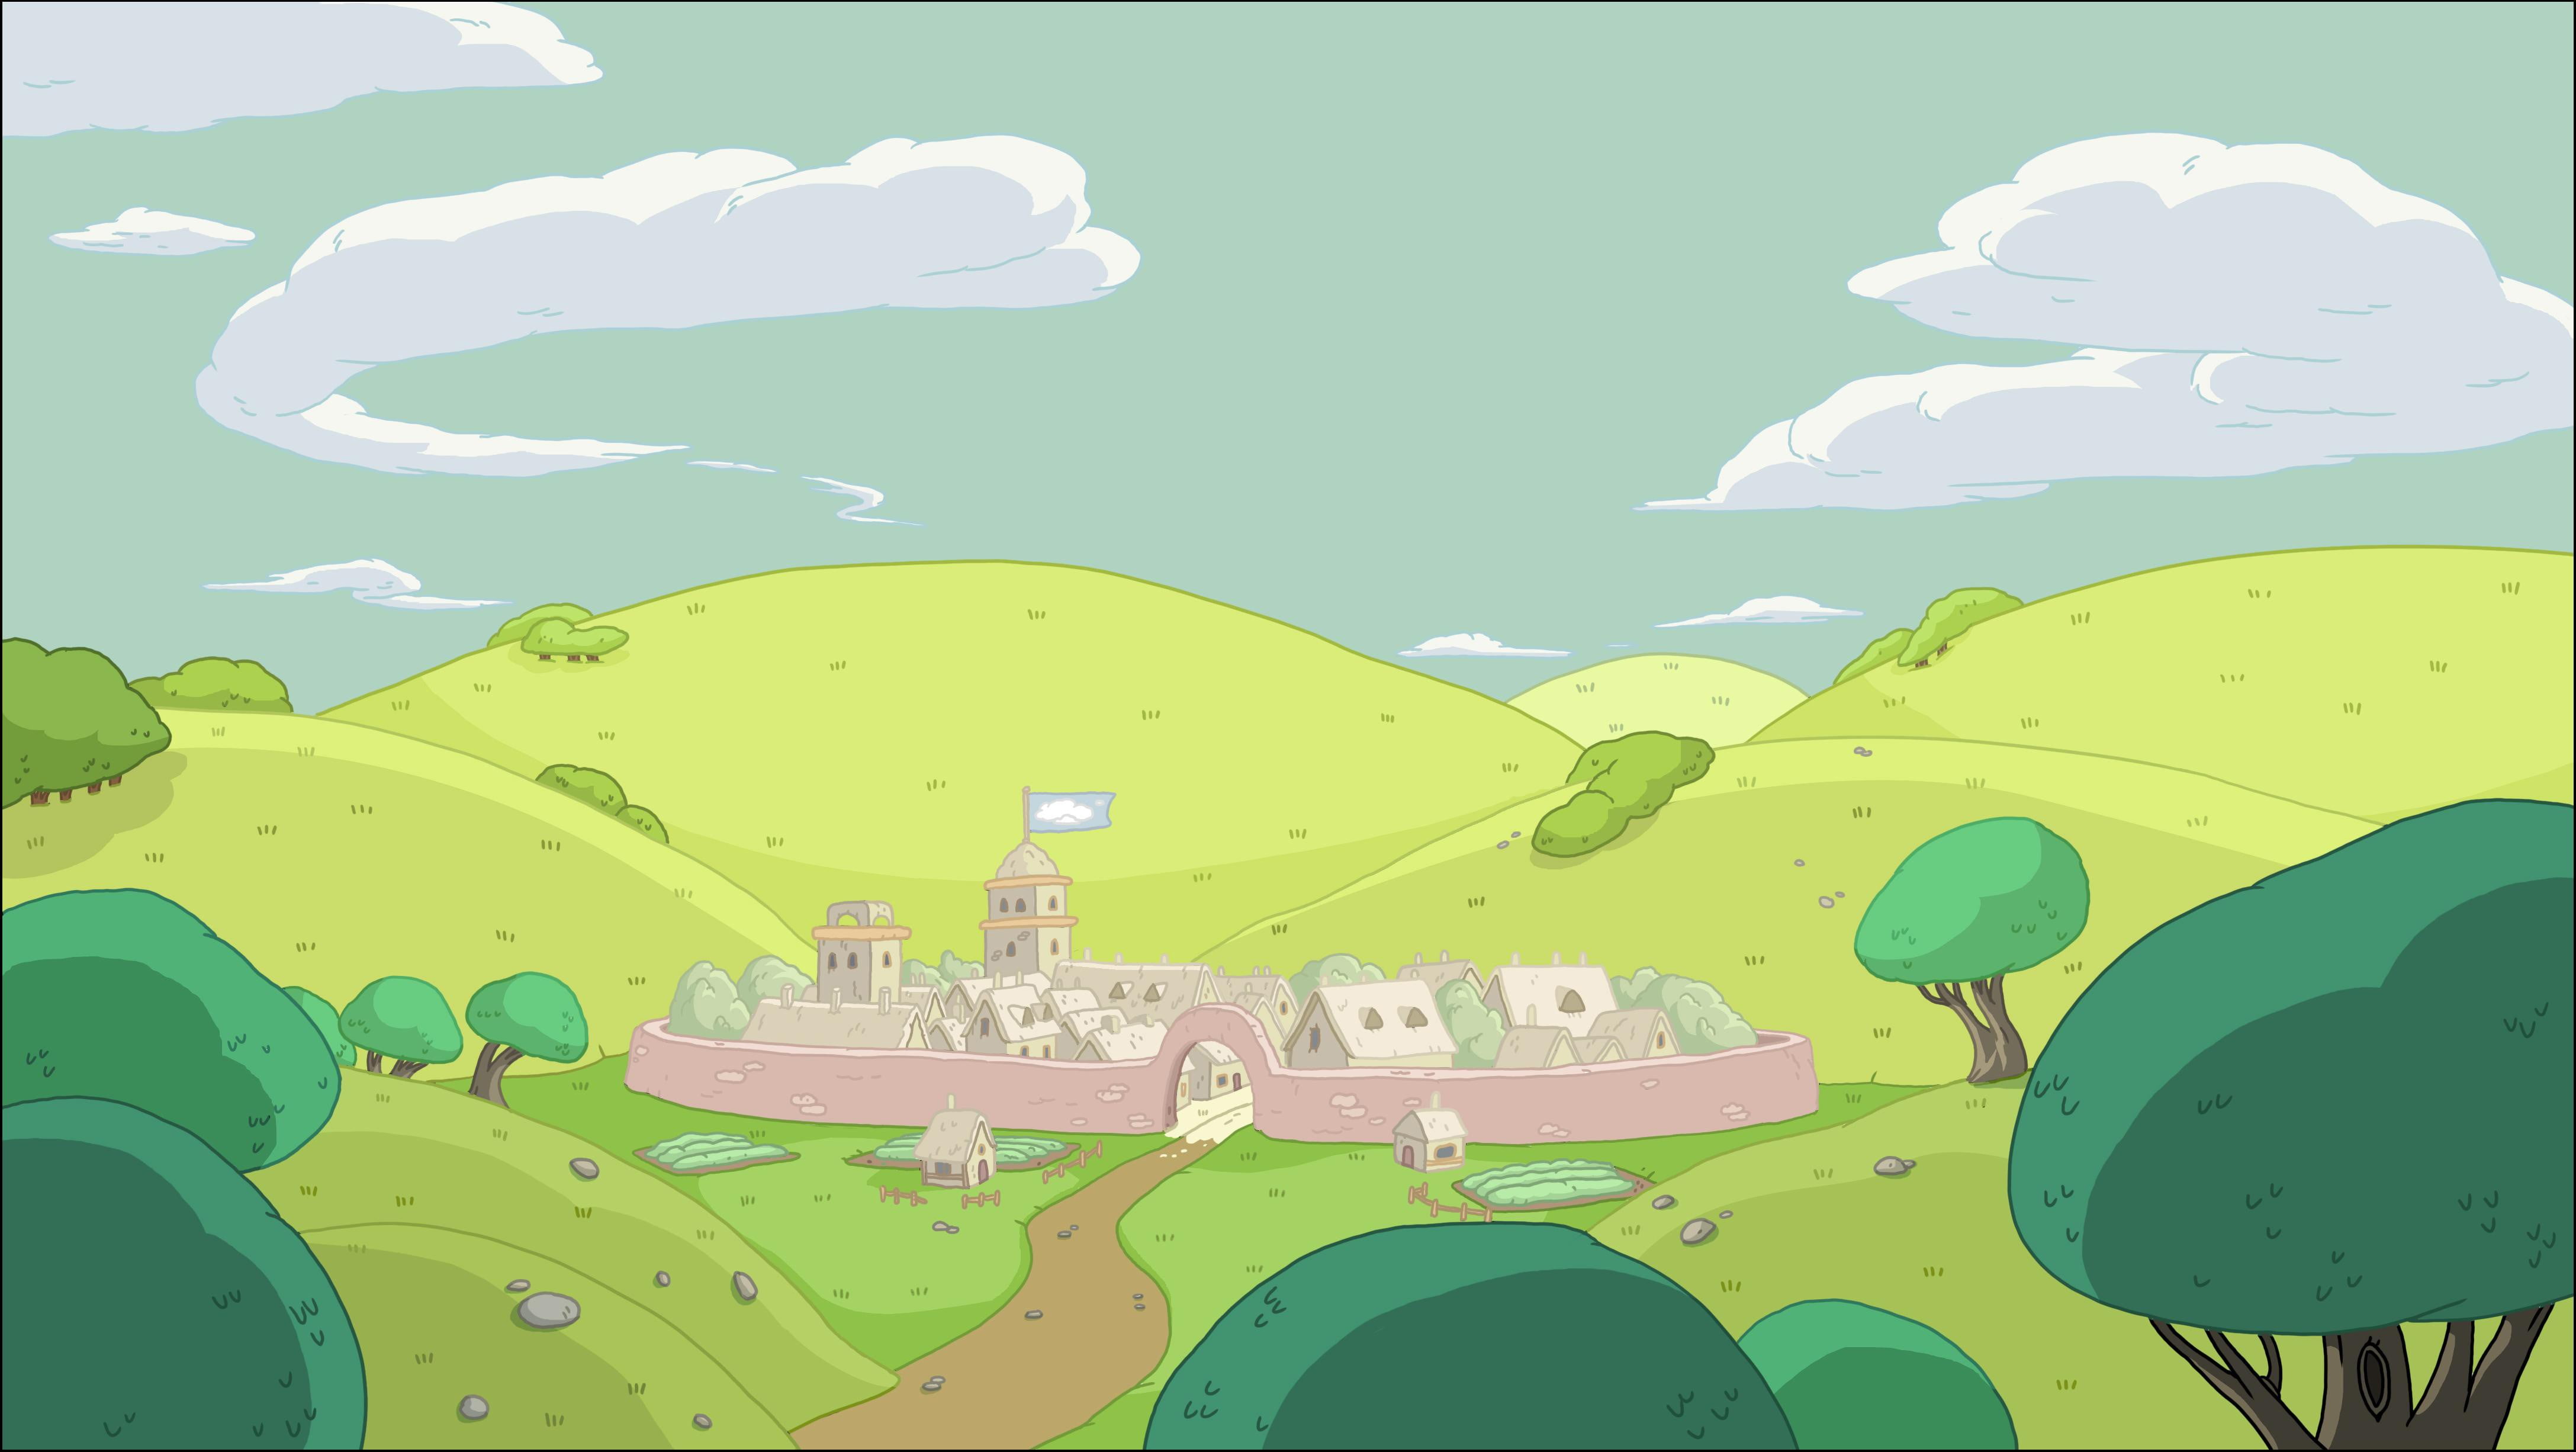 gray caster surrounded by trees illustration, Adventure Time, cartoon